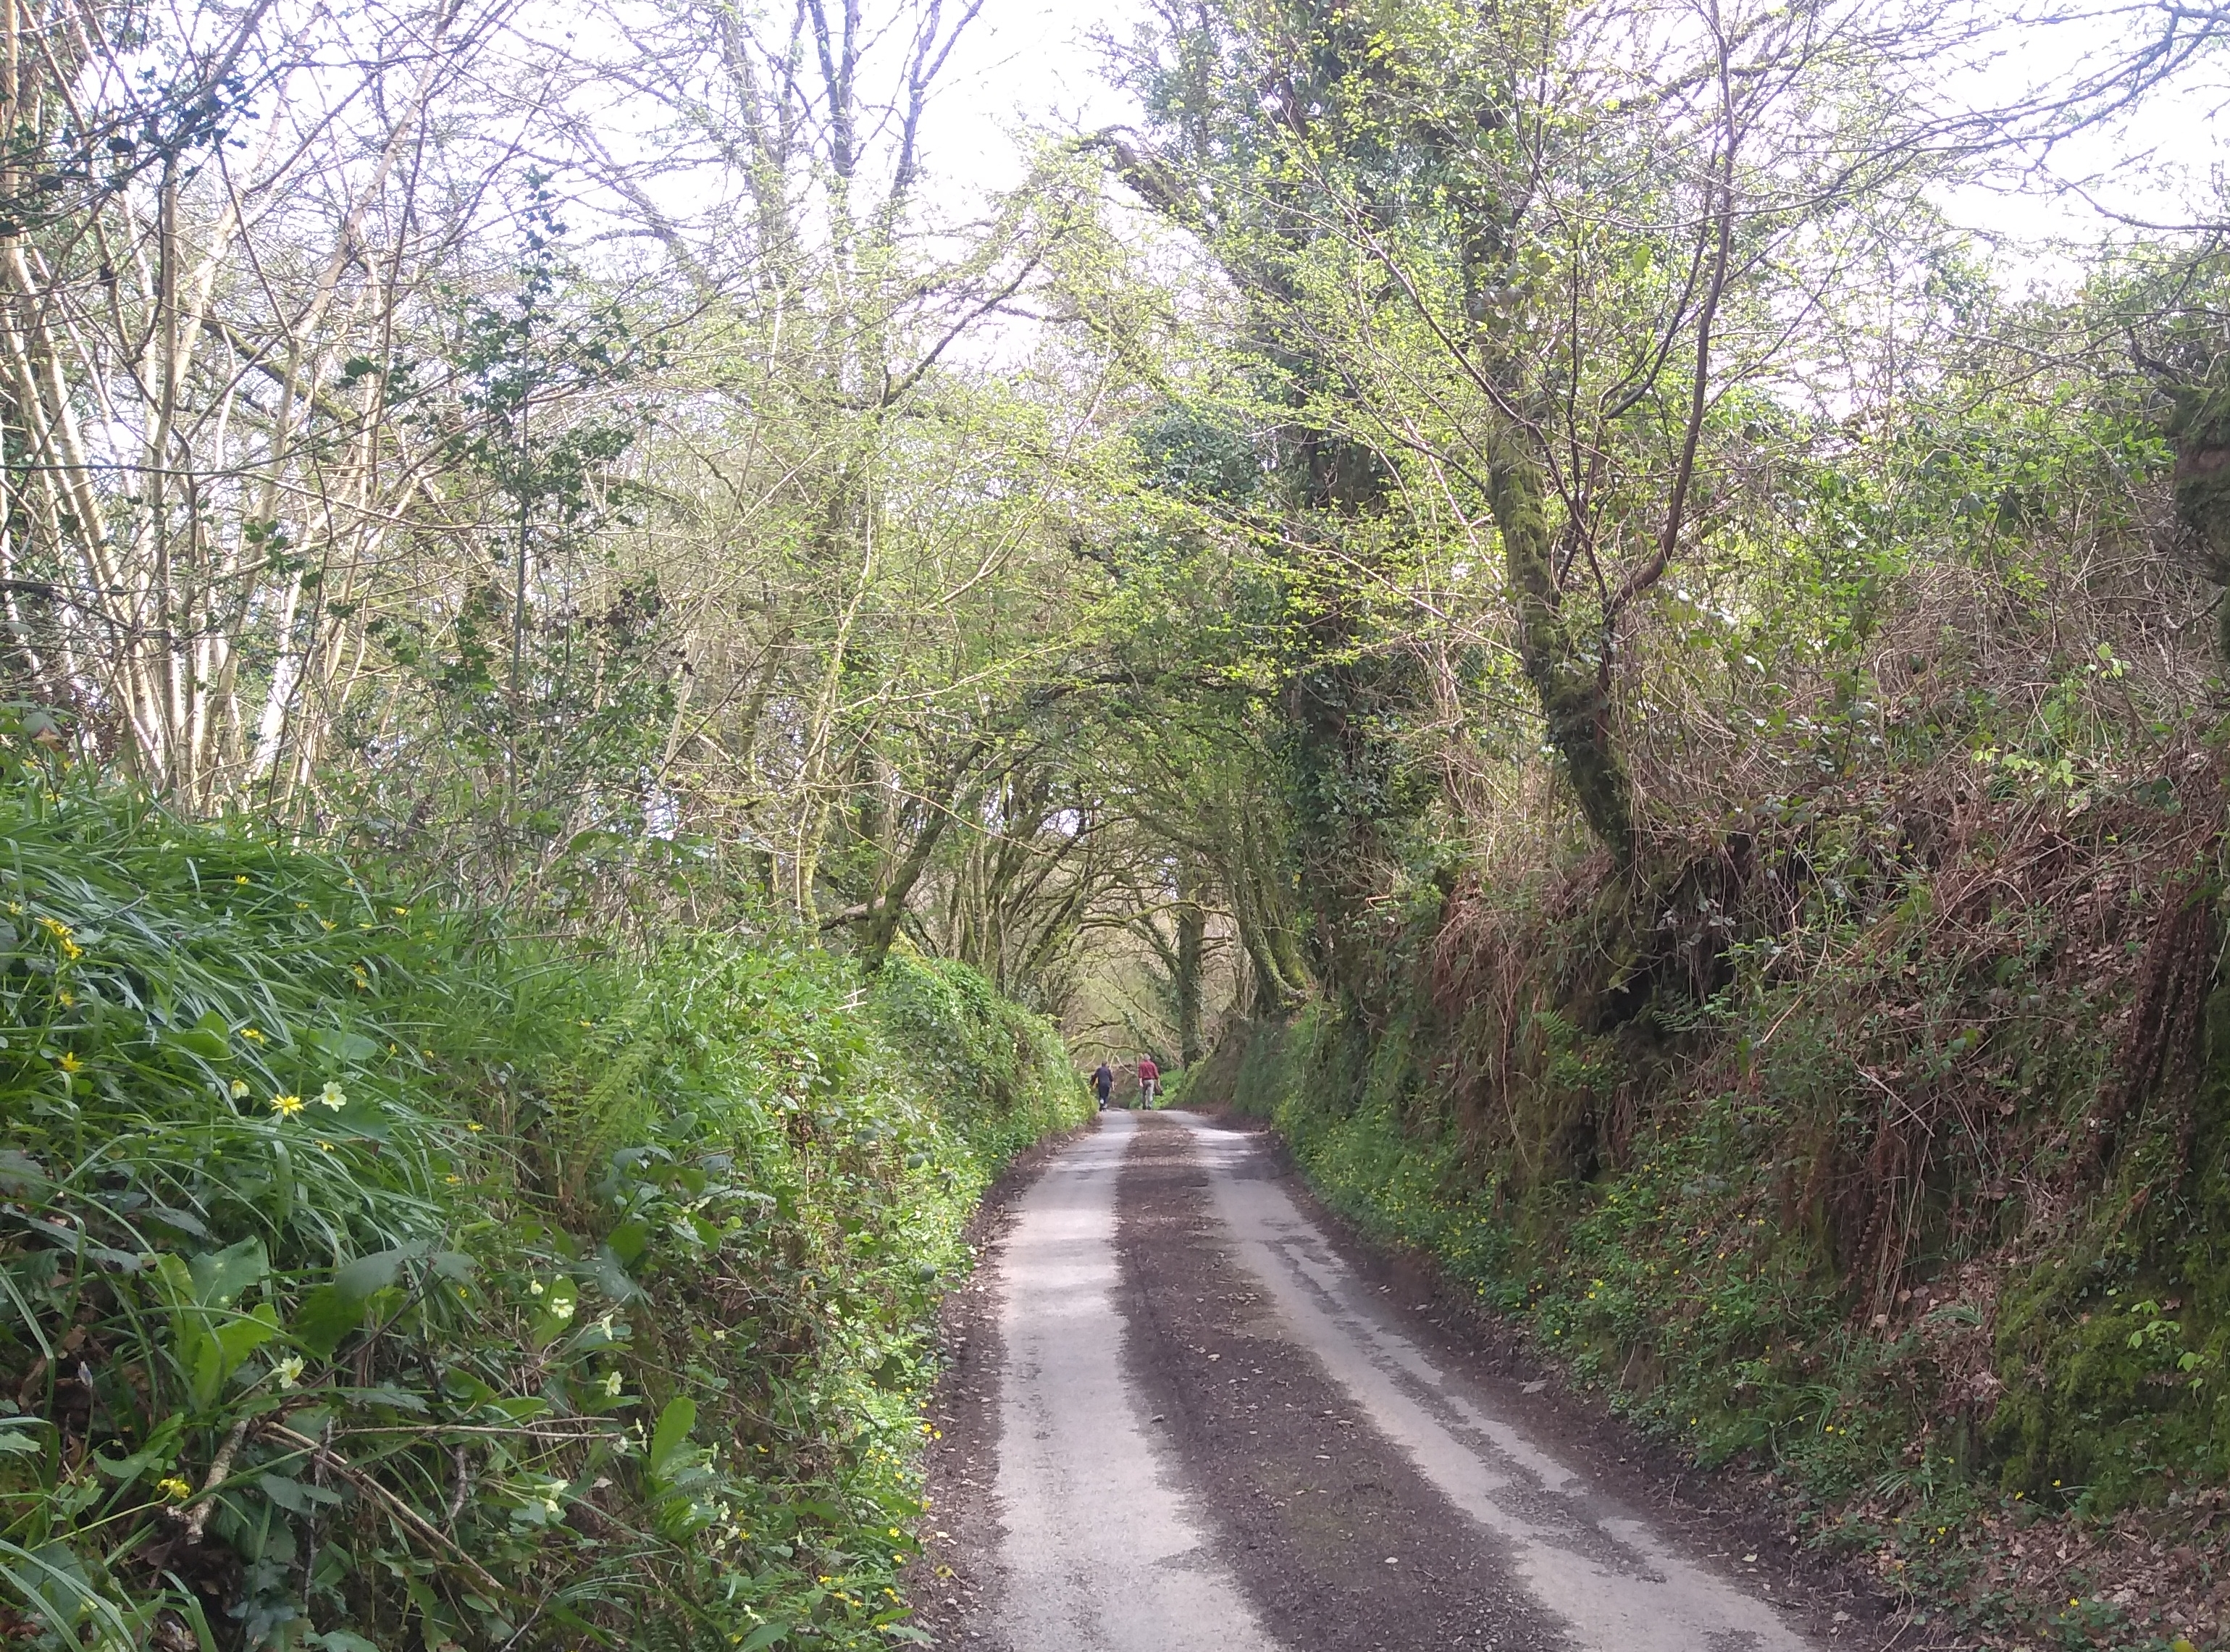 Road with overhanging trees